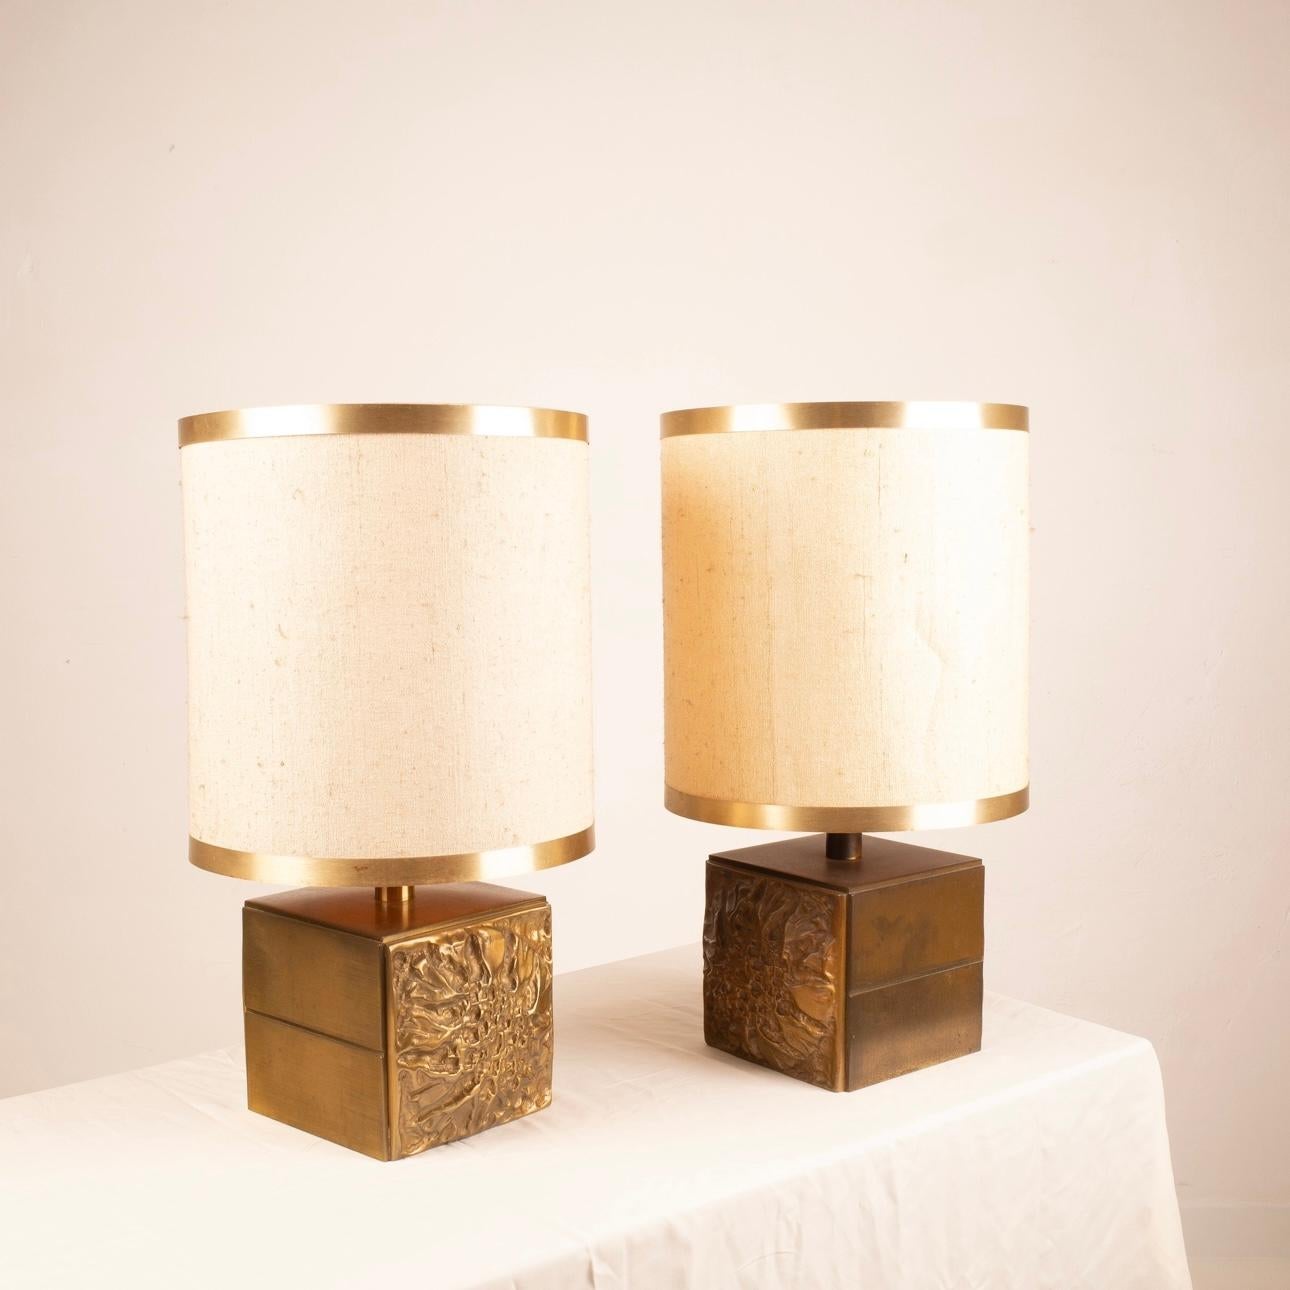 Pair of Brutalist Lamps by Luciano Frigerio for Frigerio of Desio For Sale 5